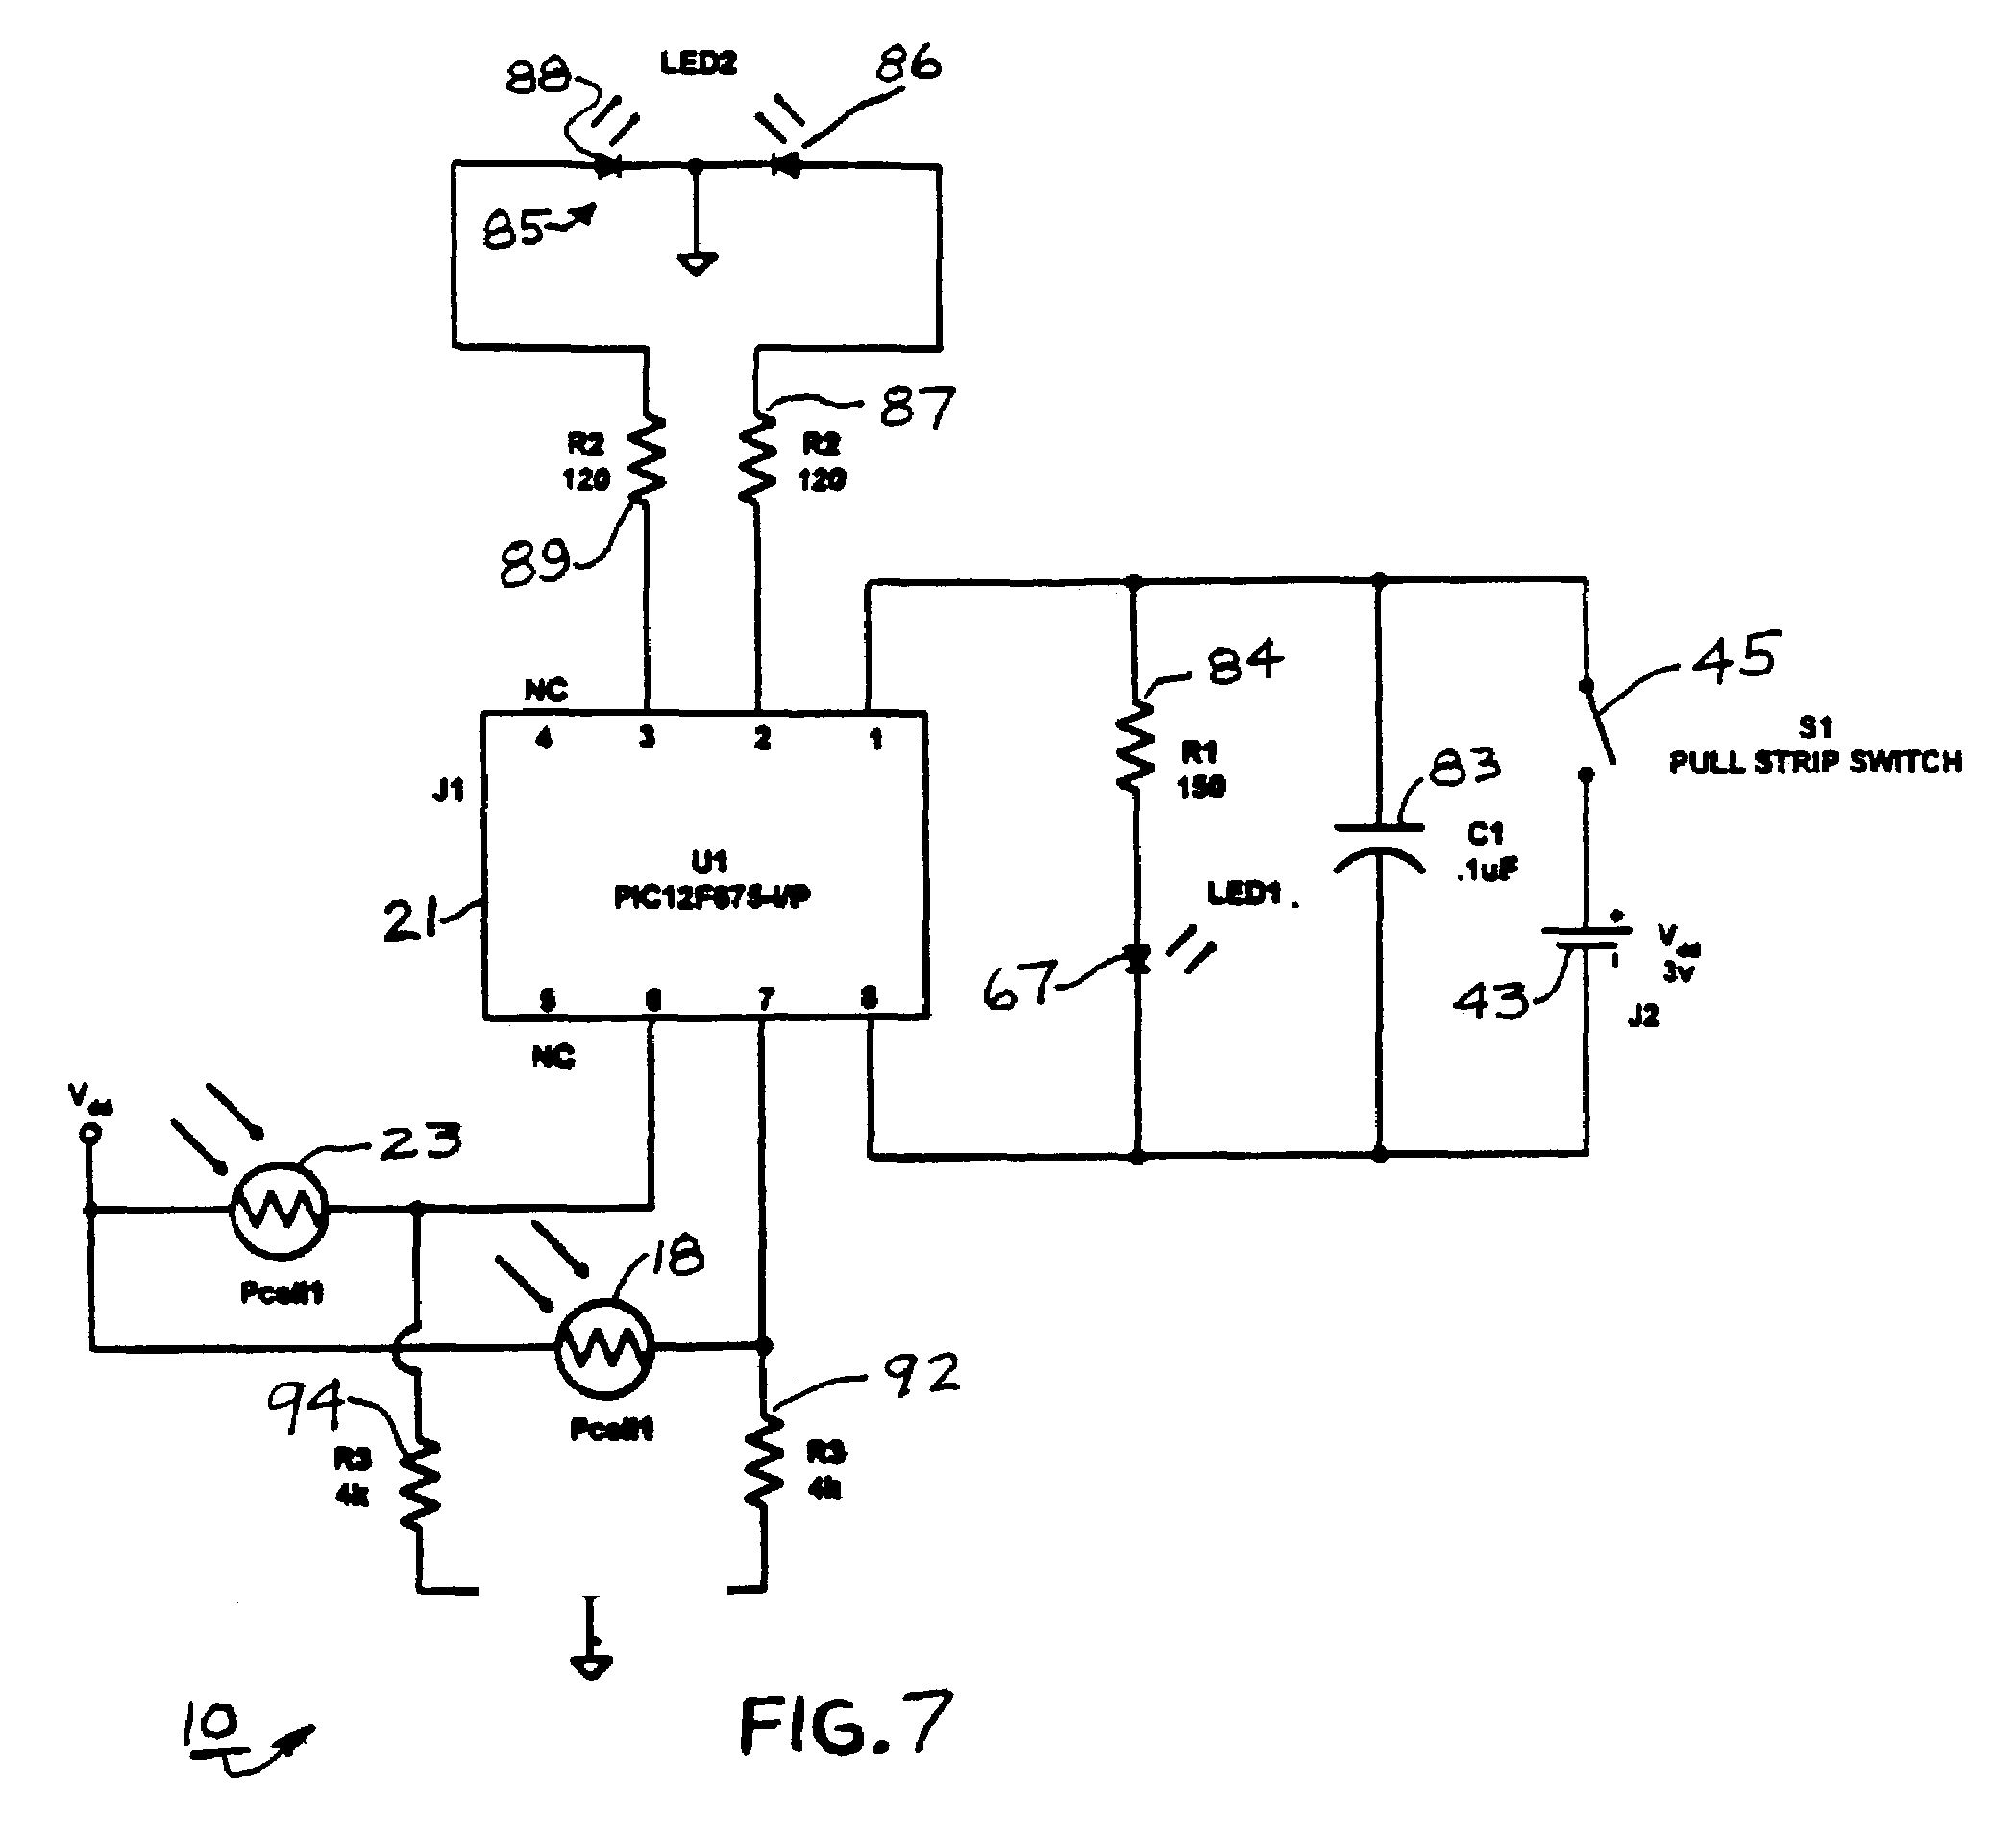 Assay test device and method of making same